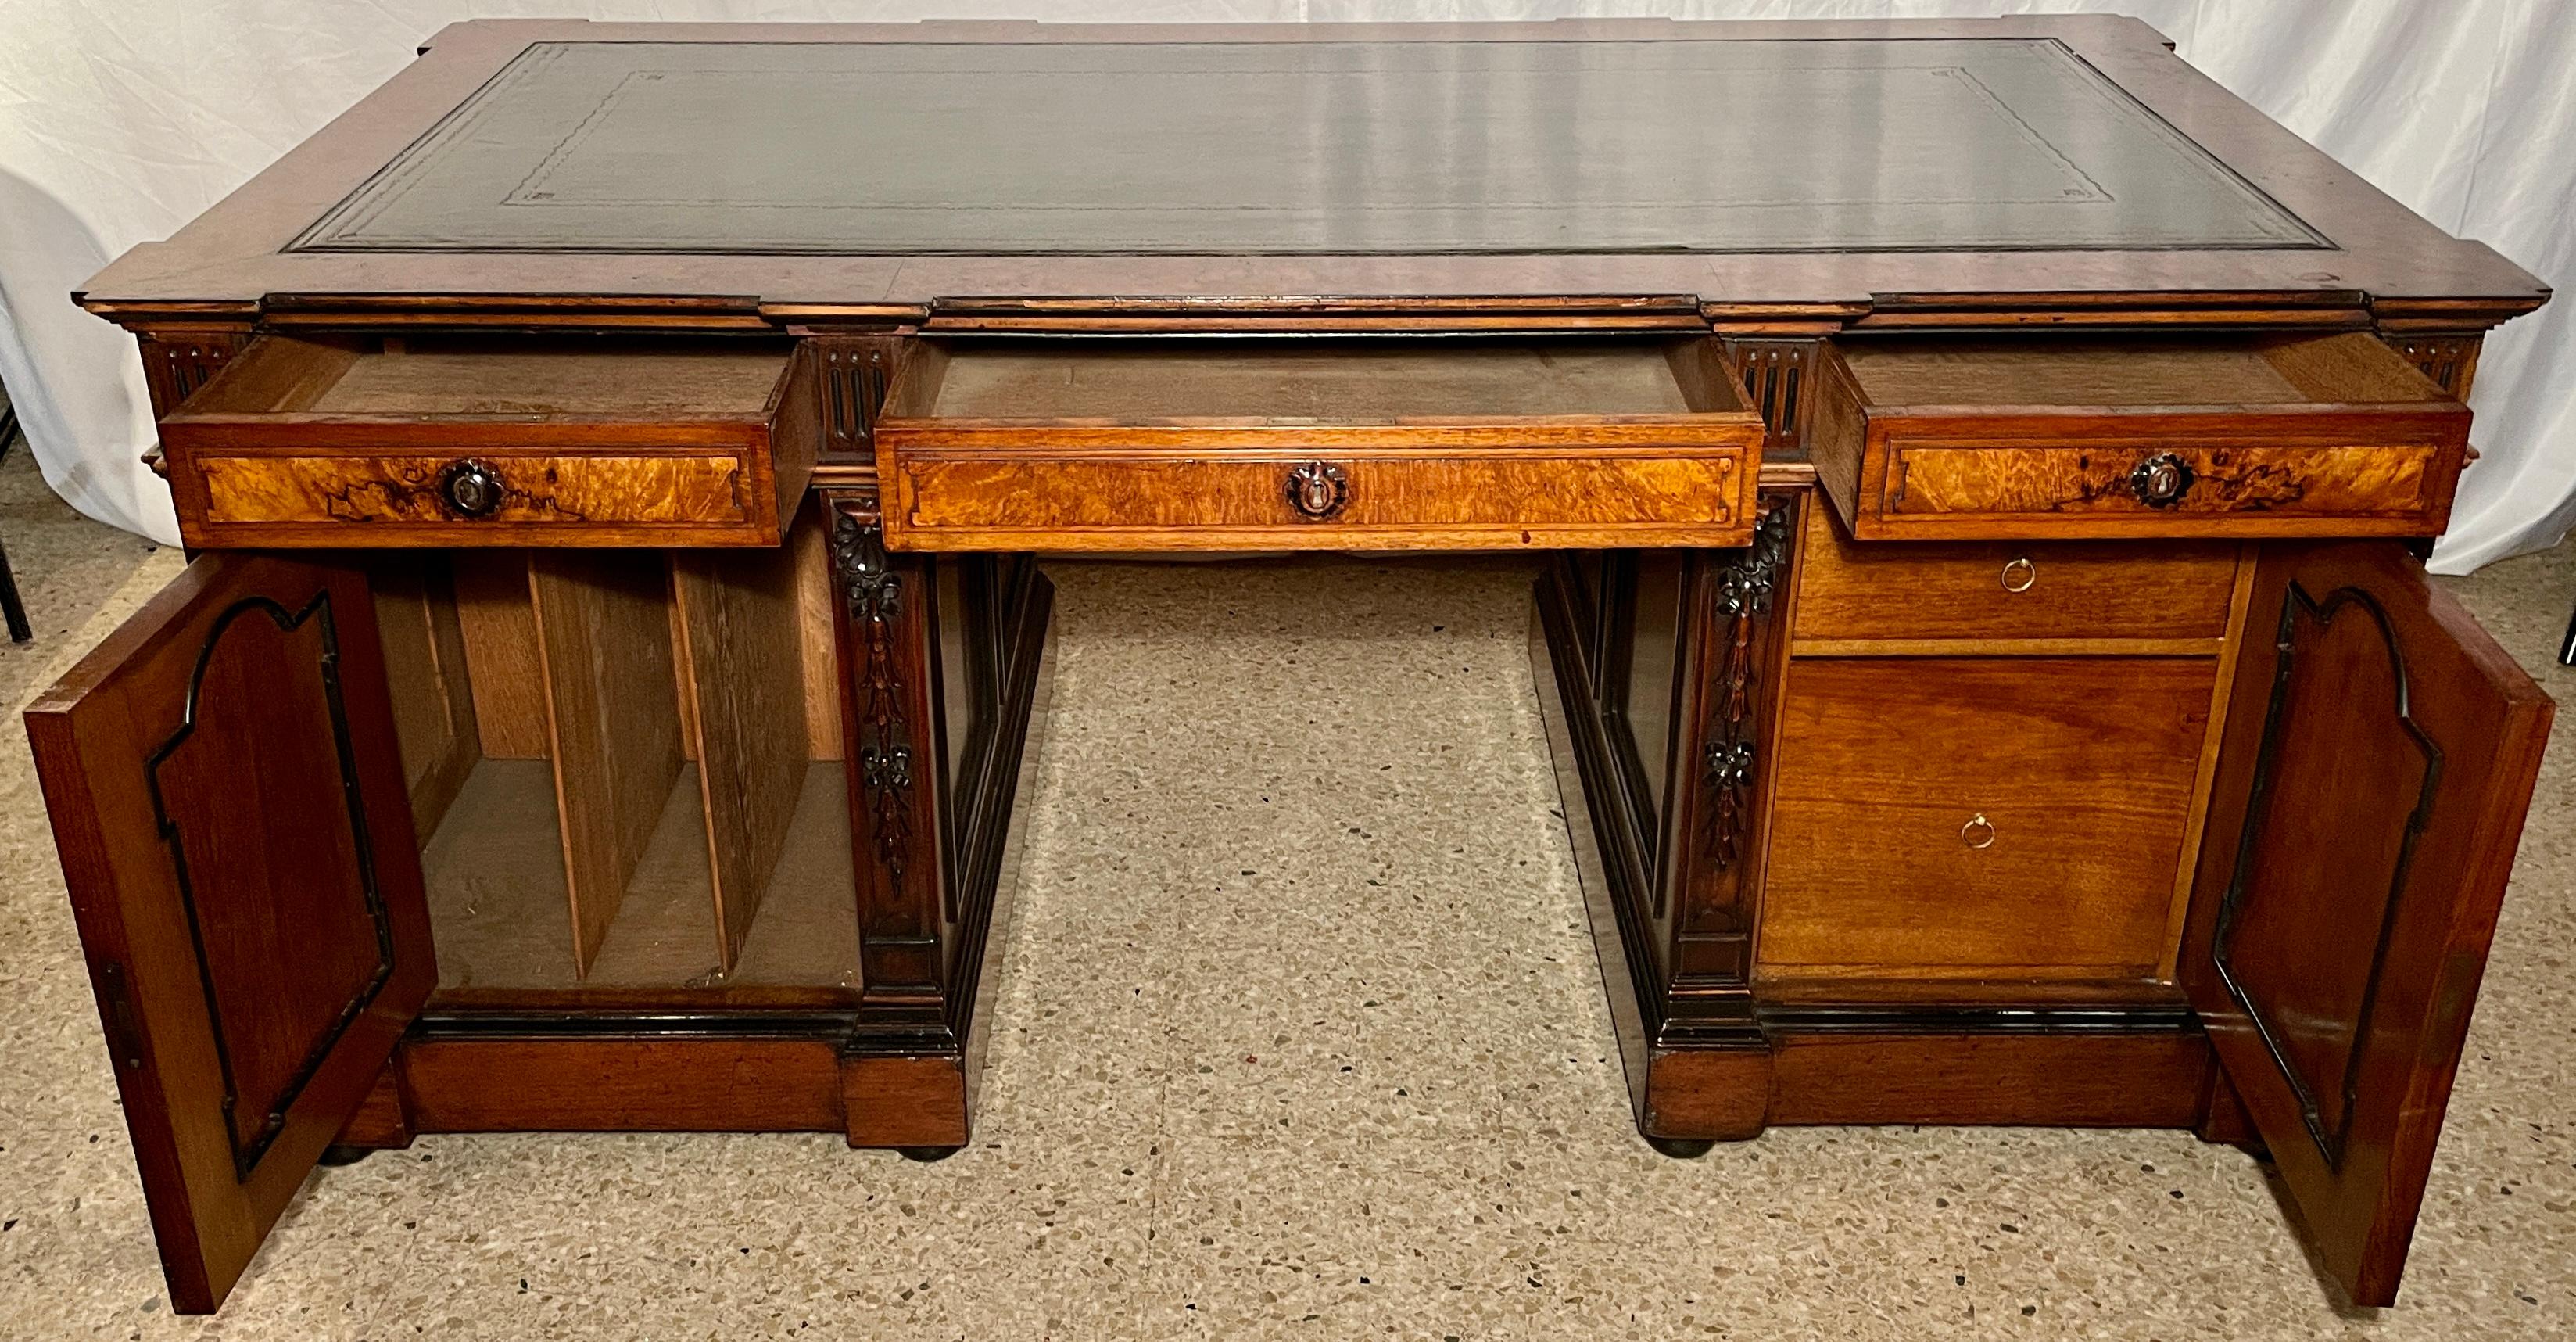 Antique English Burled Walnut Partner's Desk with Leather Top, Circa 1900. 2